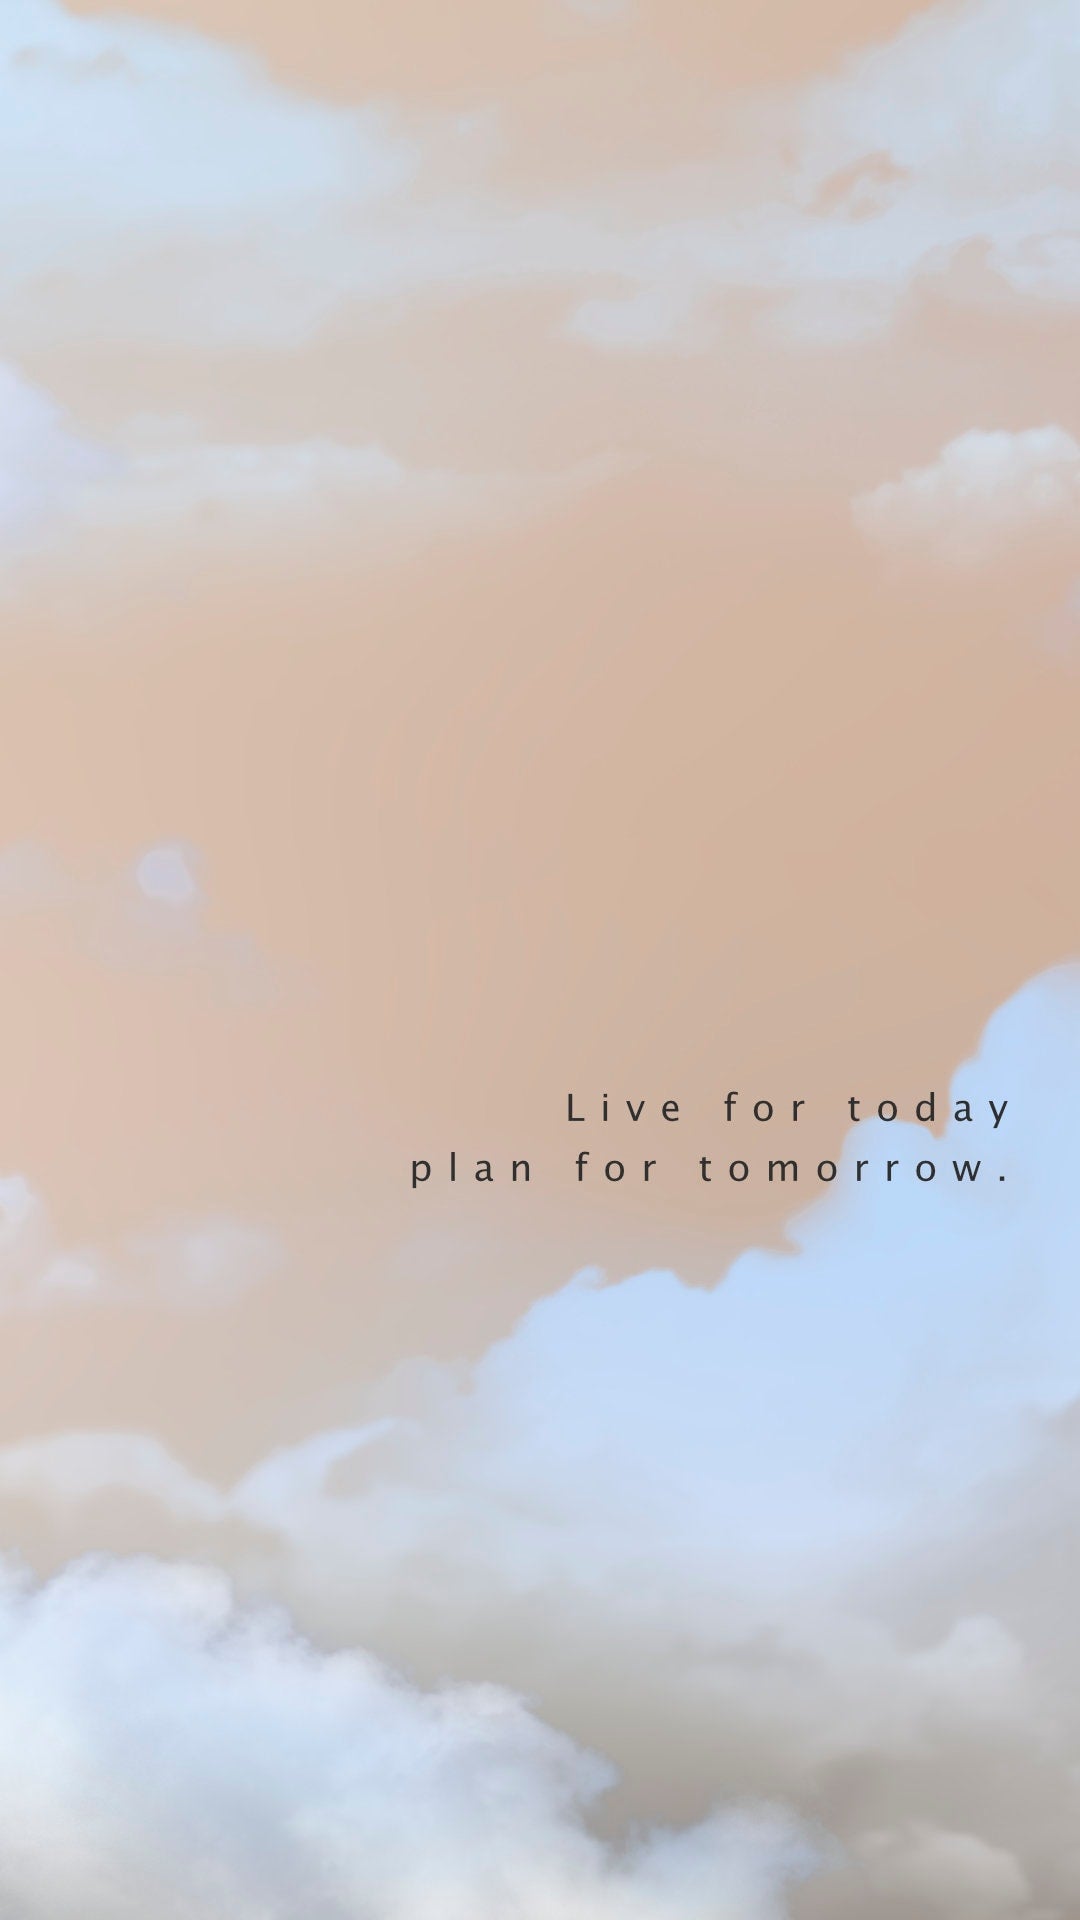 Live for today plan for tomorrow Quote Print | Inspirational Quotes | Motivational Prints | Manifestation Print | Aesthetic Room Decor